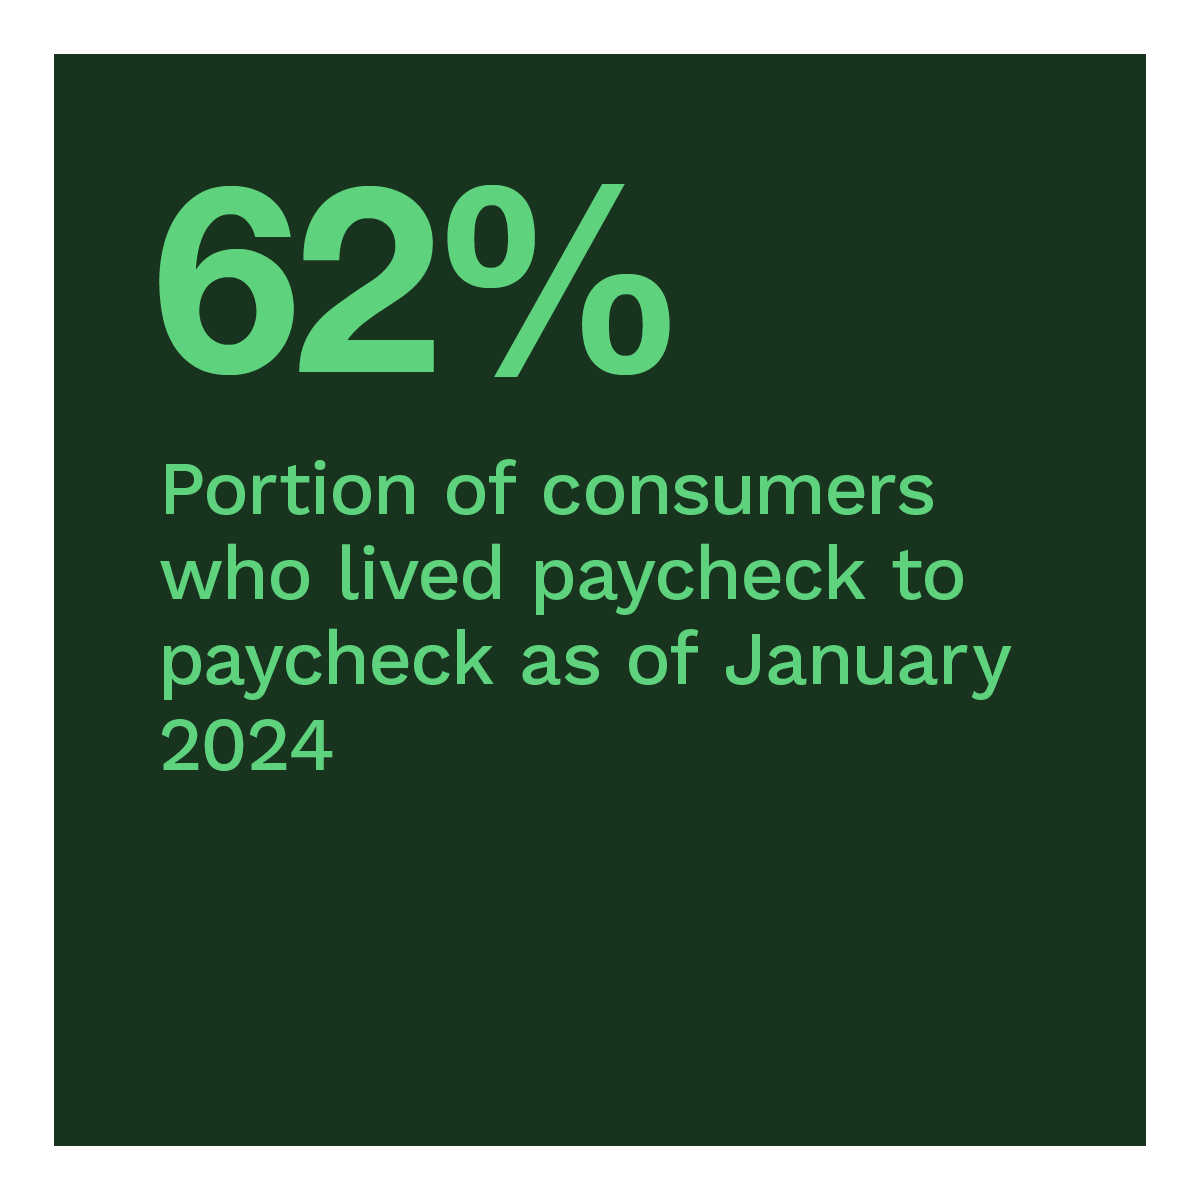 62%: Portion of consumers who lived paycheck to paycheck as of January 2024